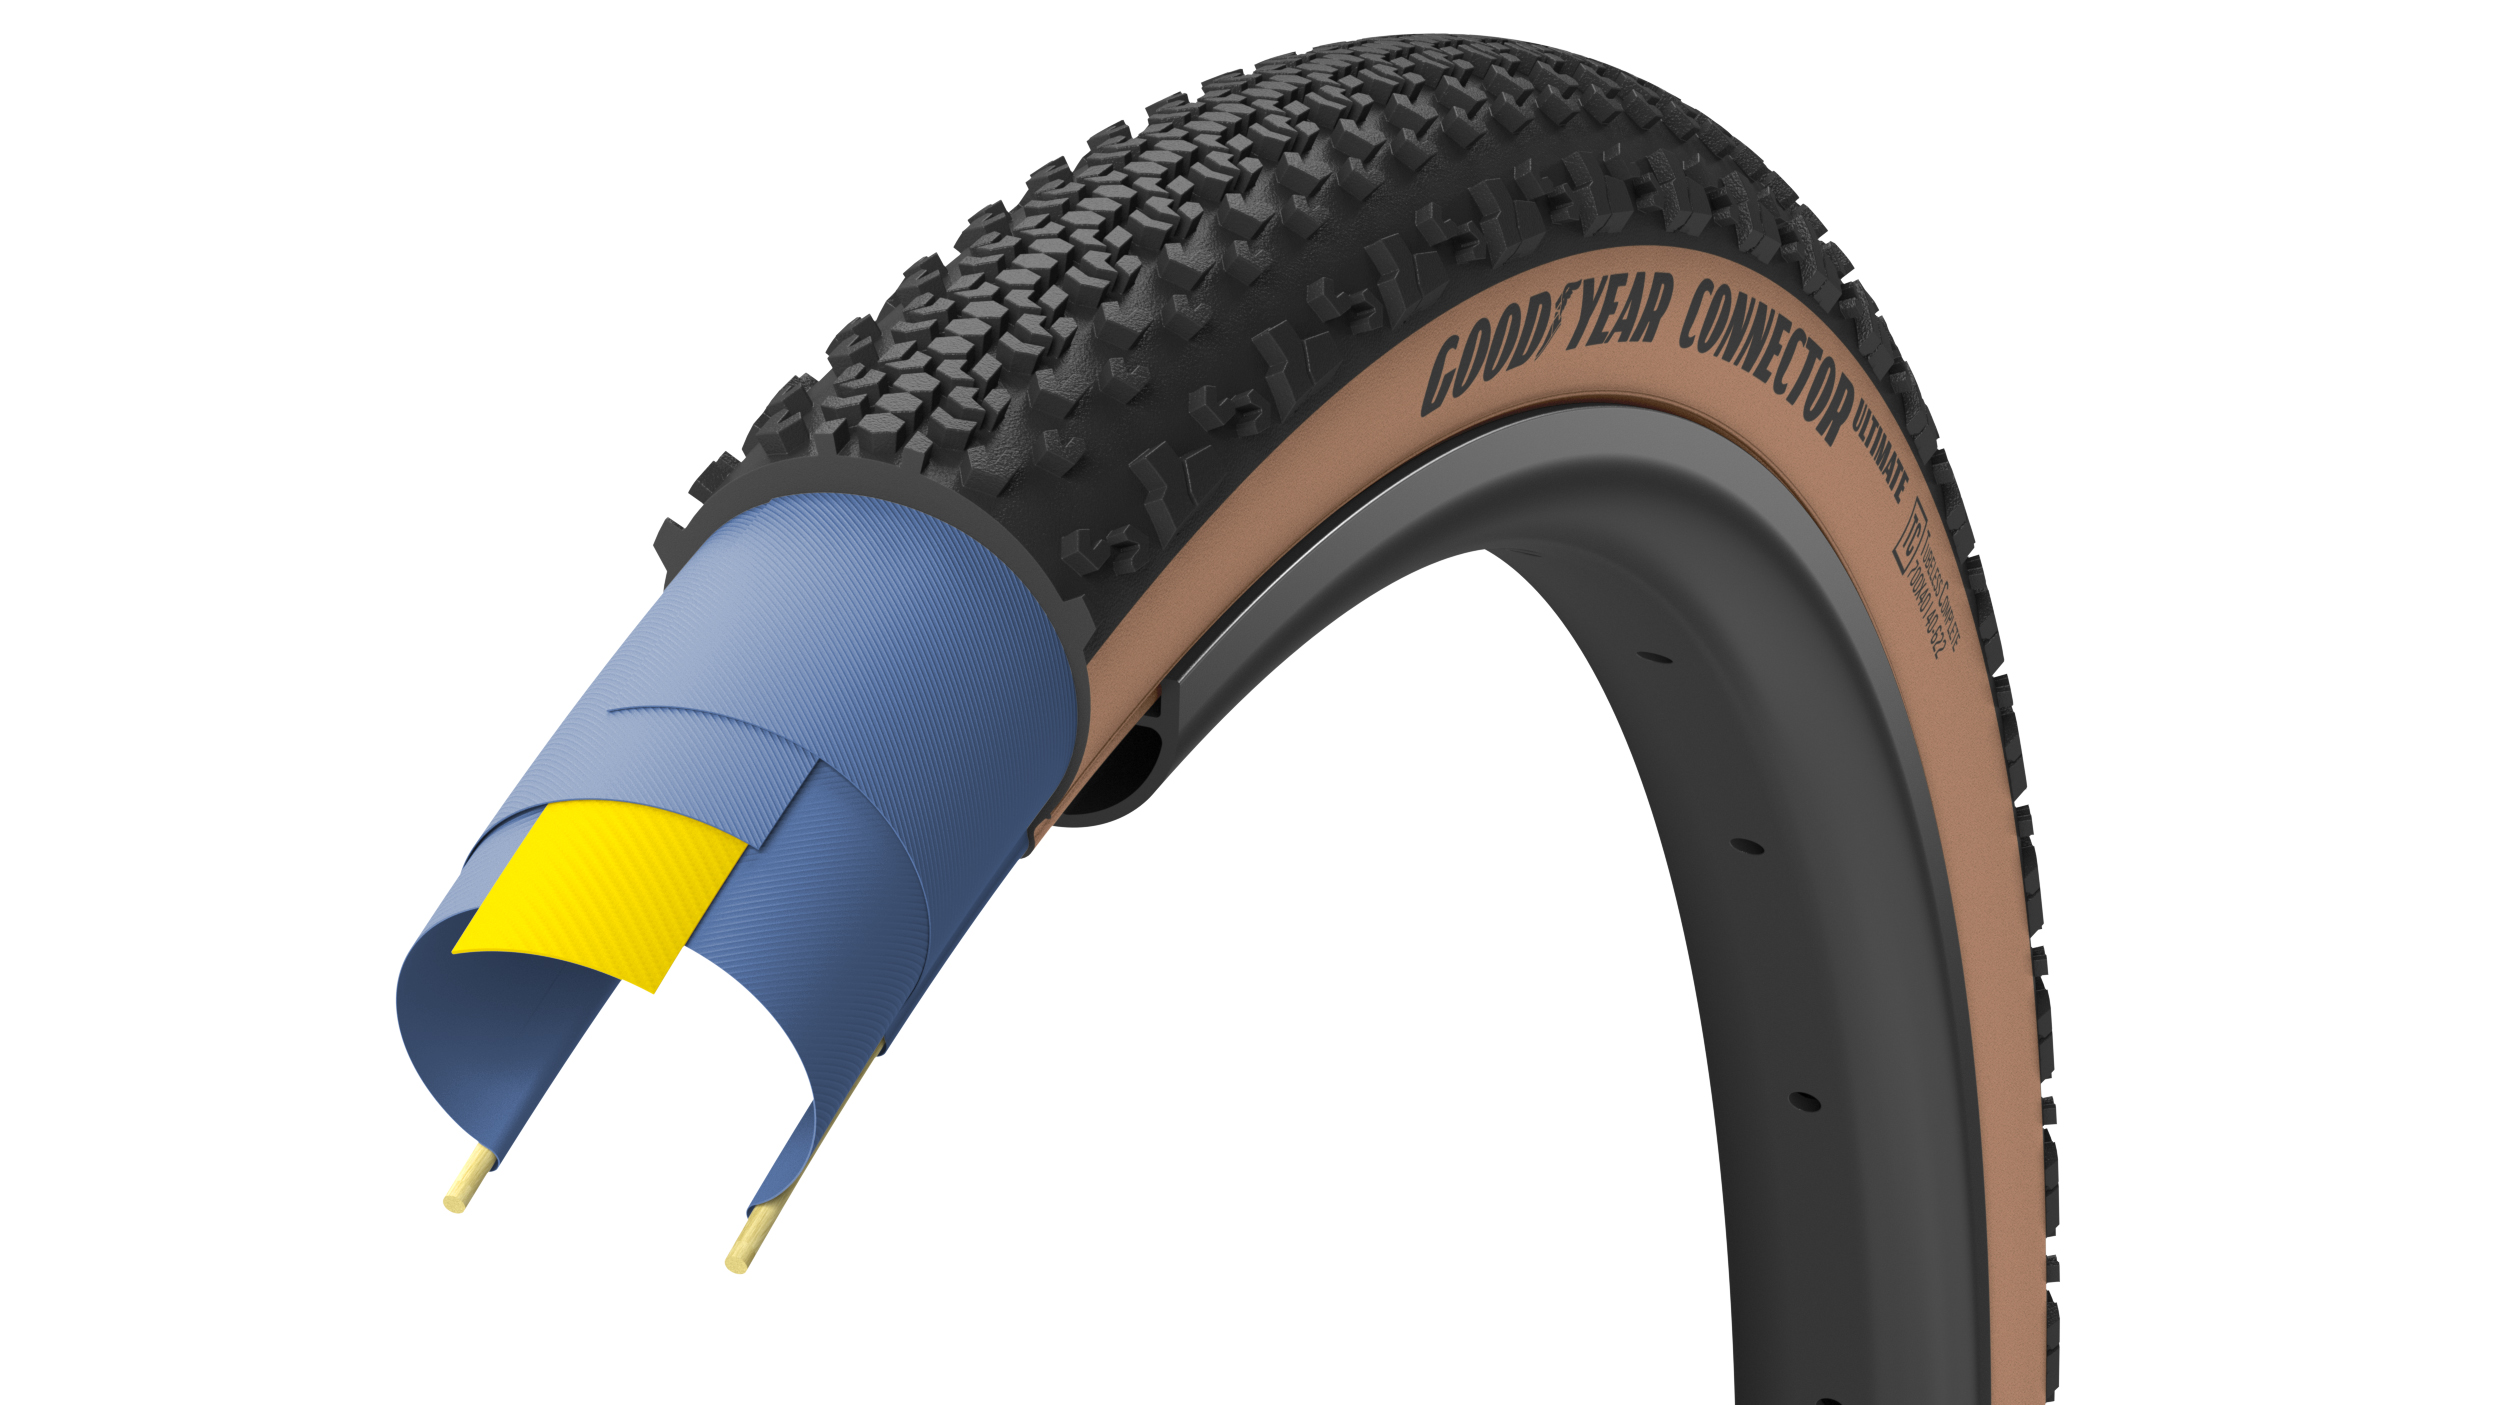 Покришка 700x50 (50-622) GoodYear CONNECTOR Ultimate Tubeless Complete, Blk/Tan фото 